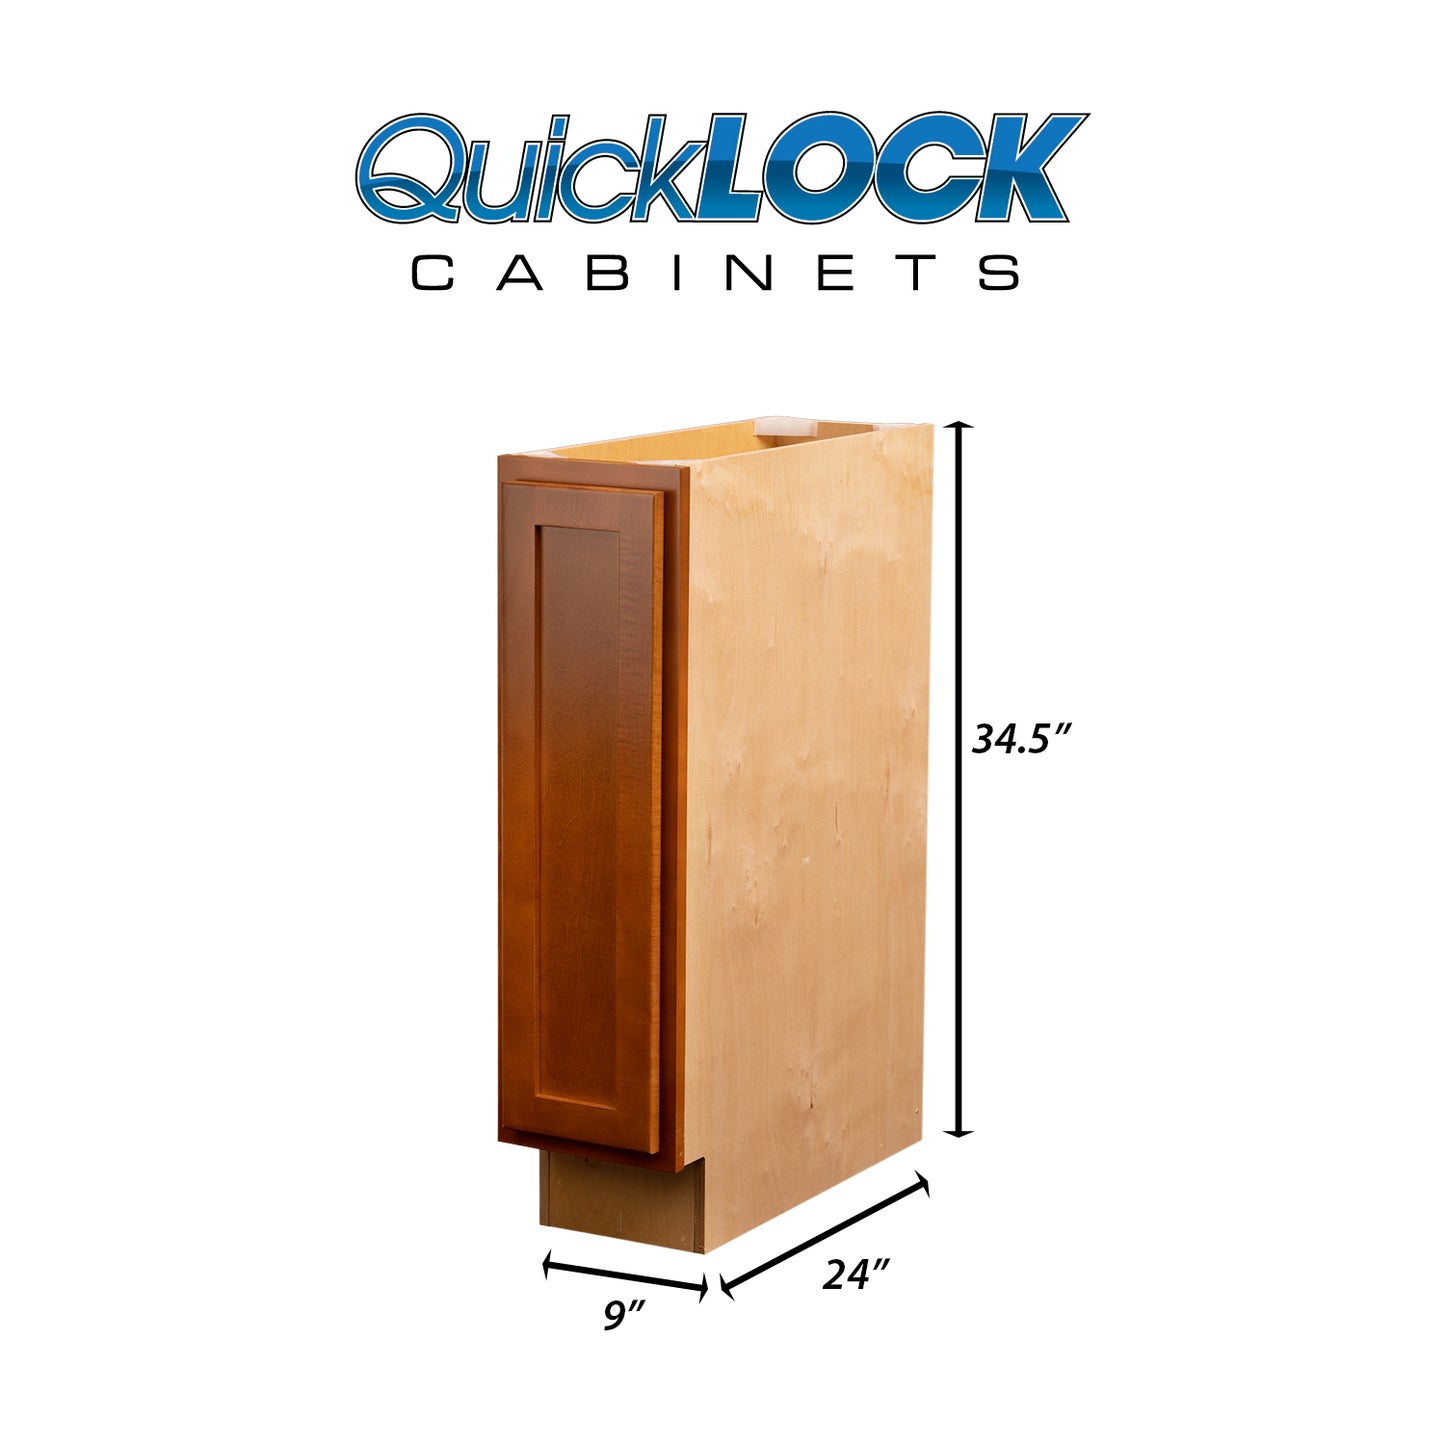 Quicklock RTA (Ready-to-Assemble) Provincial Stain Base Cabinet | 9"Wx34.5"Hx24"D